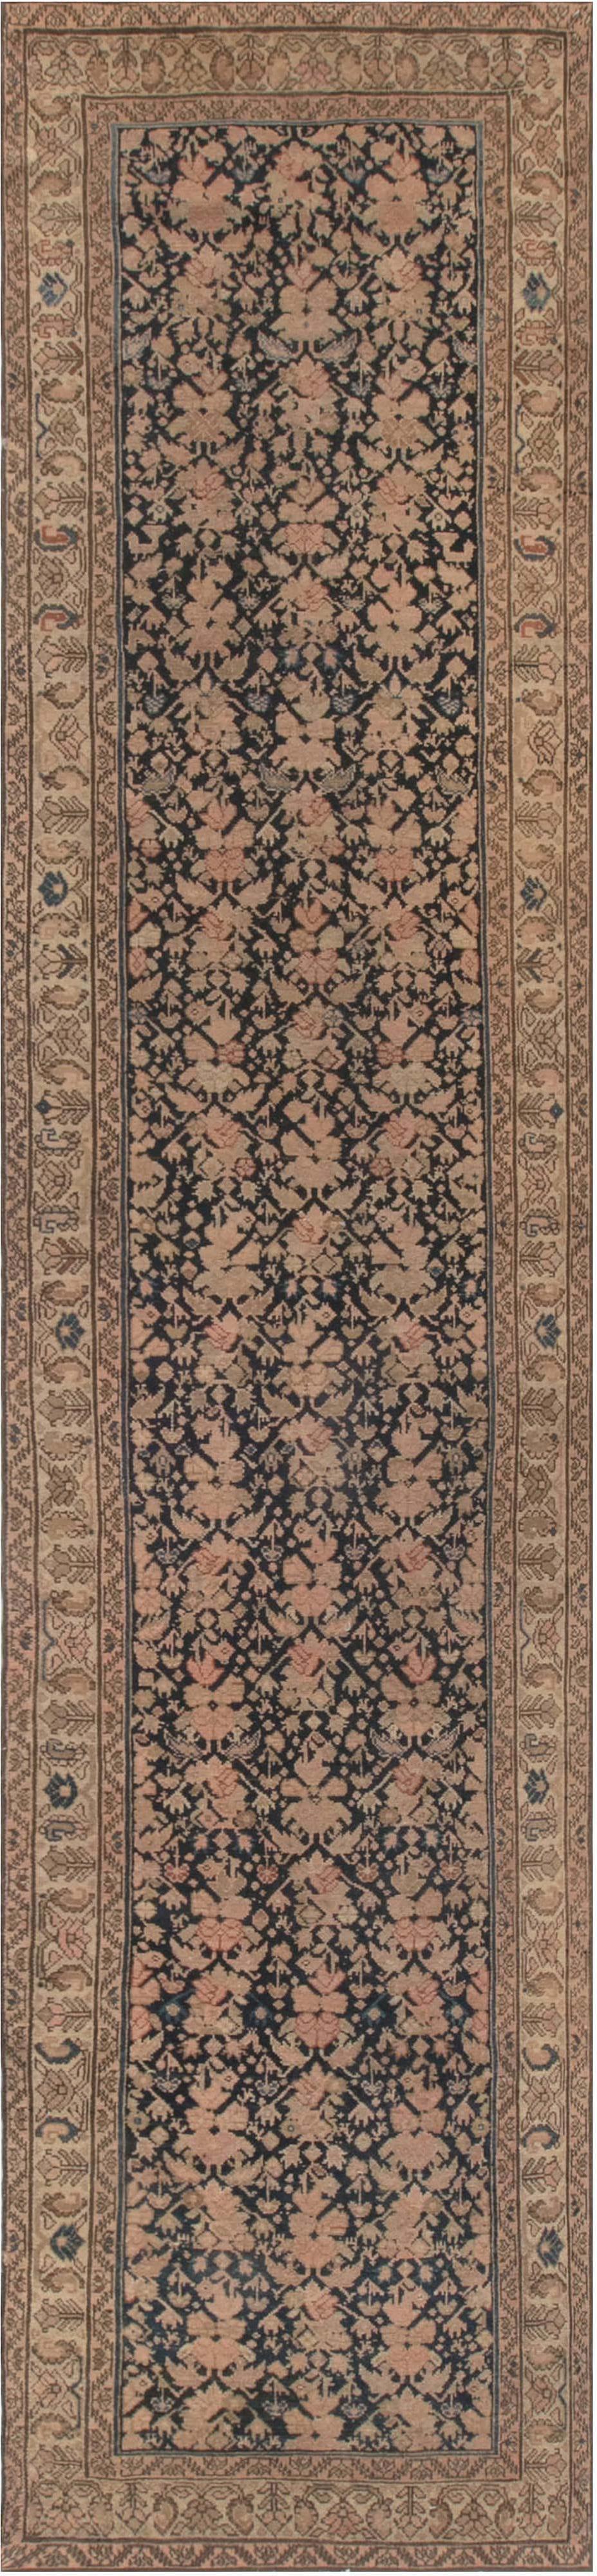 Antique Persian Malayer Handmade Wool Runner For Sale